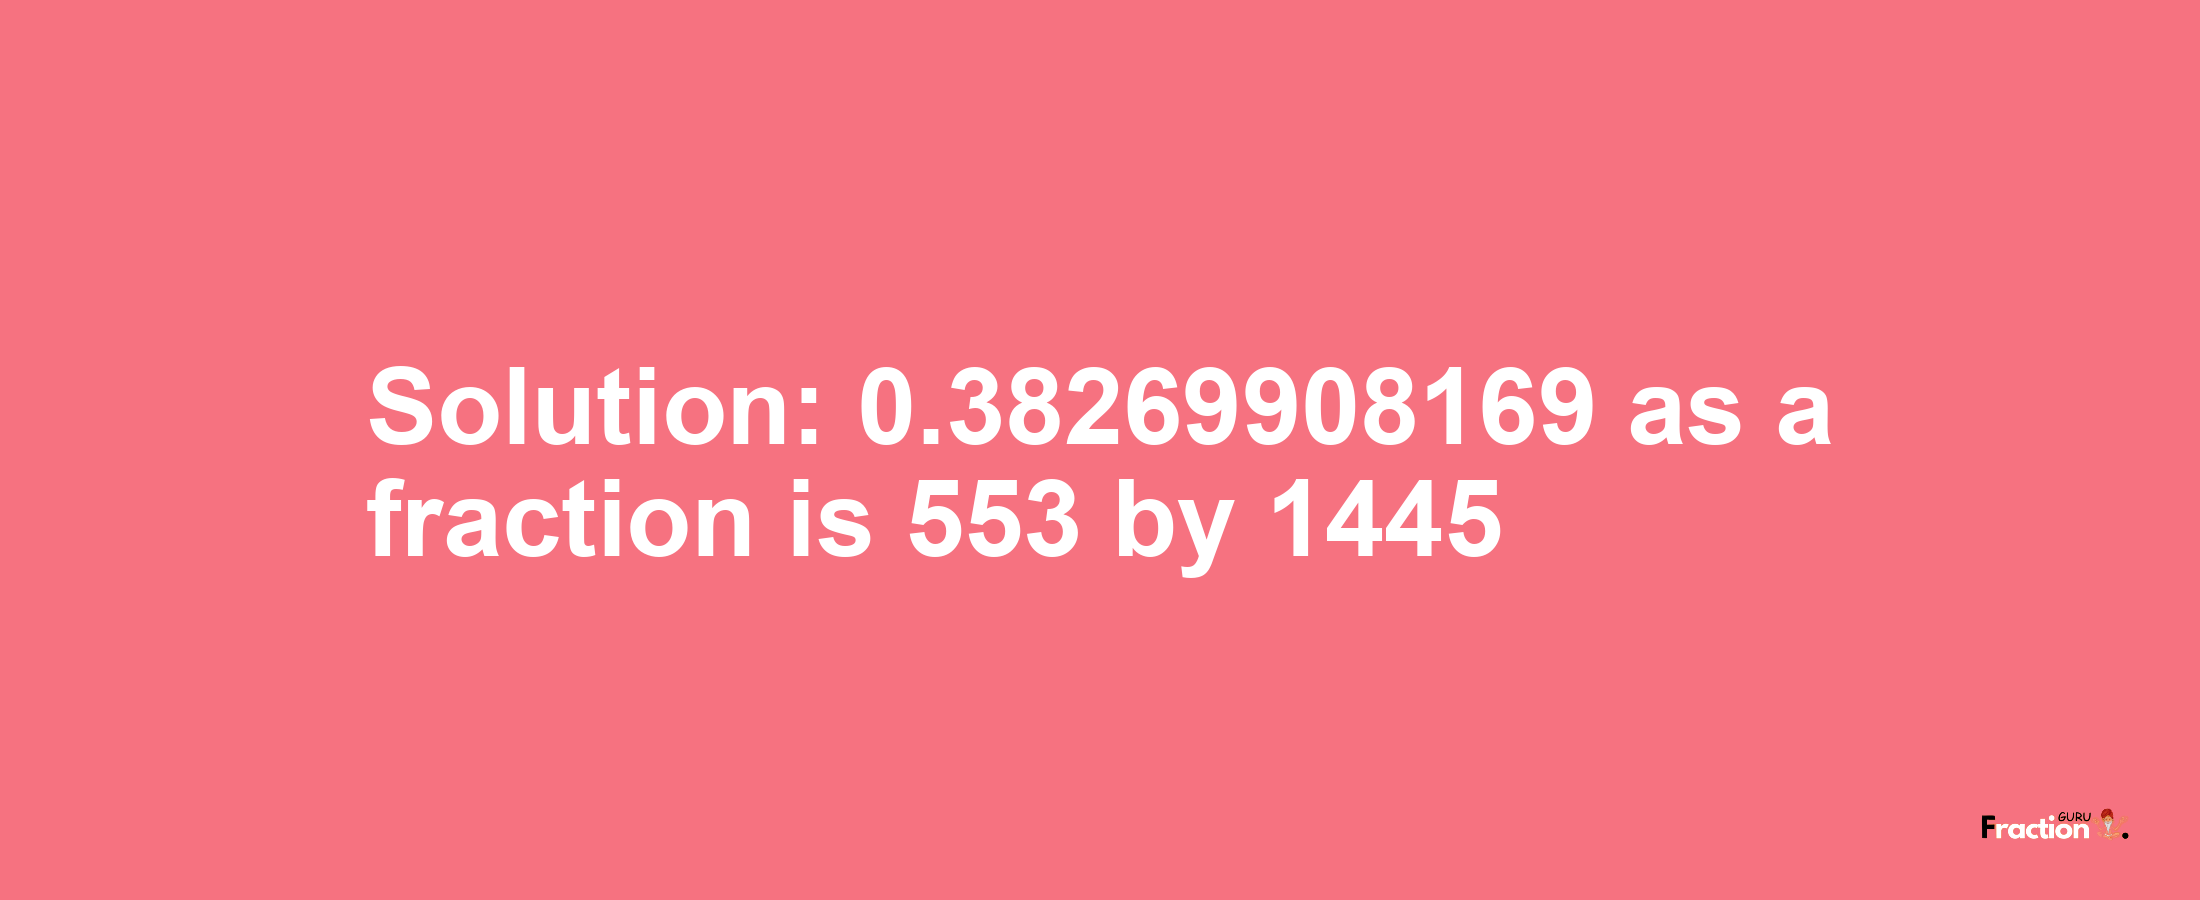 Solution:0.38269908169 as a fraction is 553/1445